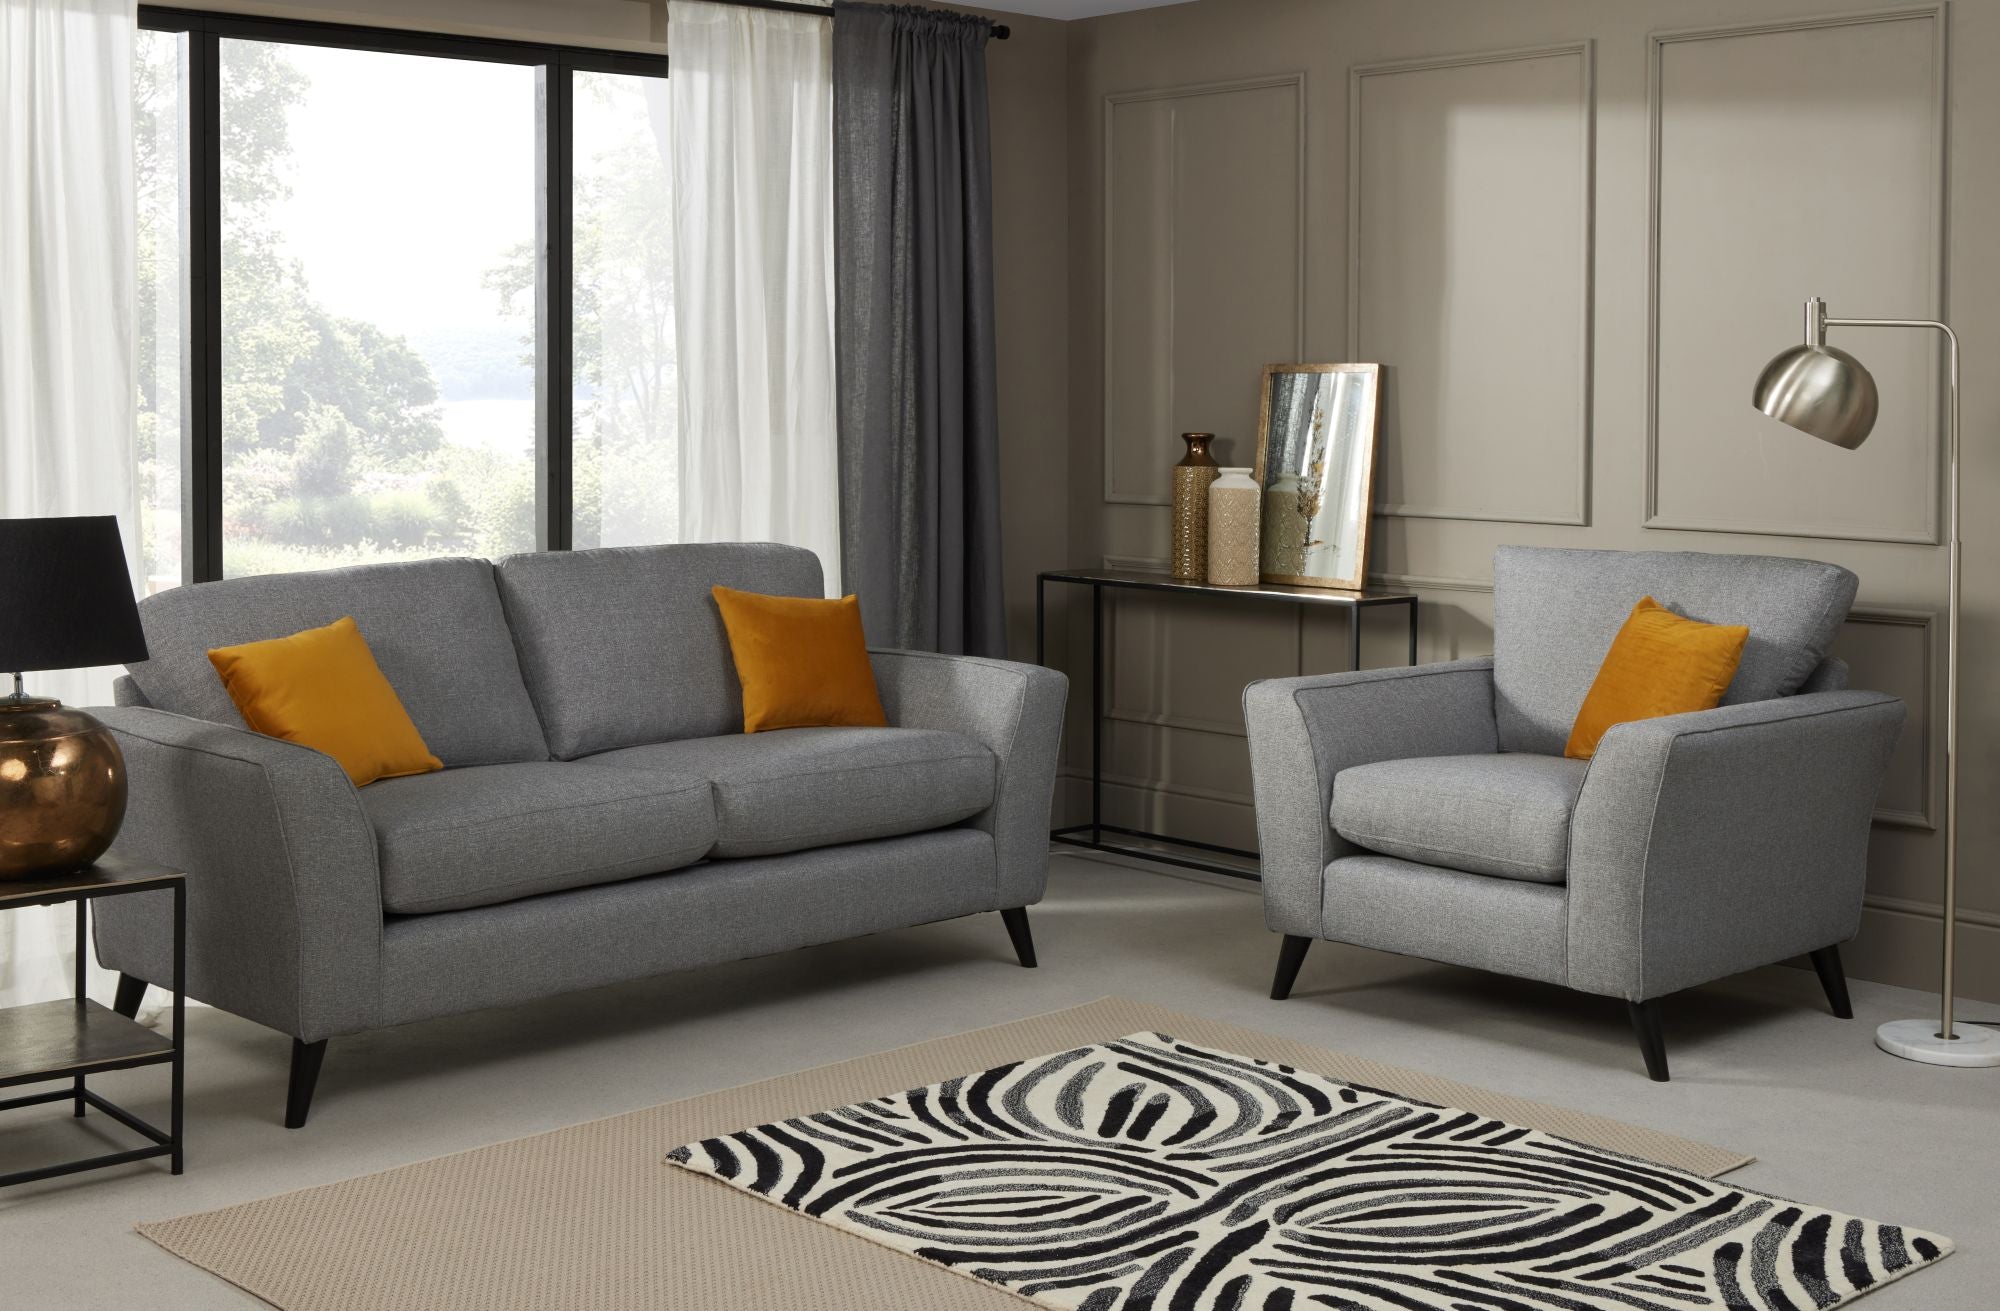 Libby 3 seater and armchair in charcoal shown in a room setting 